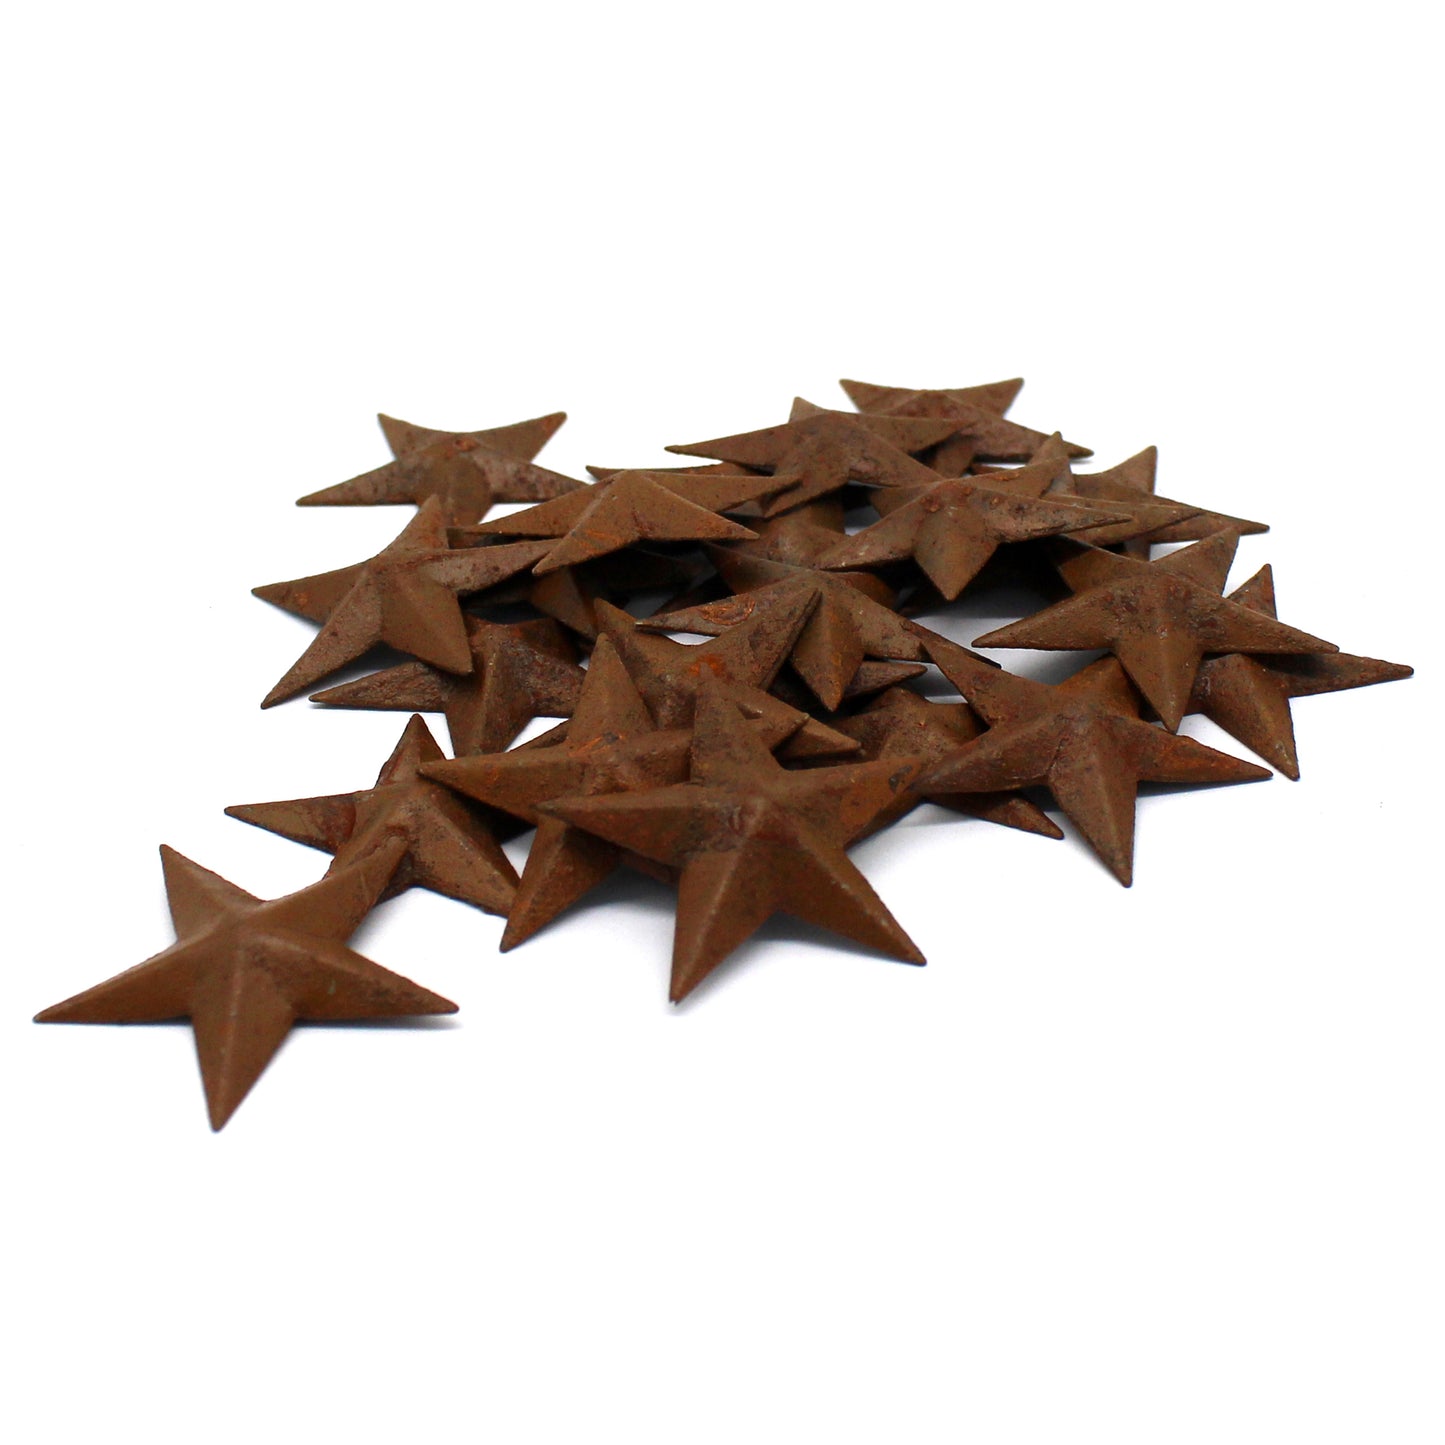 CVHOMEDECO. Primitives Rustic Country Décor. Rusty Mini Metal Barn Star Home Decorative Accents, 1.5 Inch, Set of 52